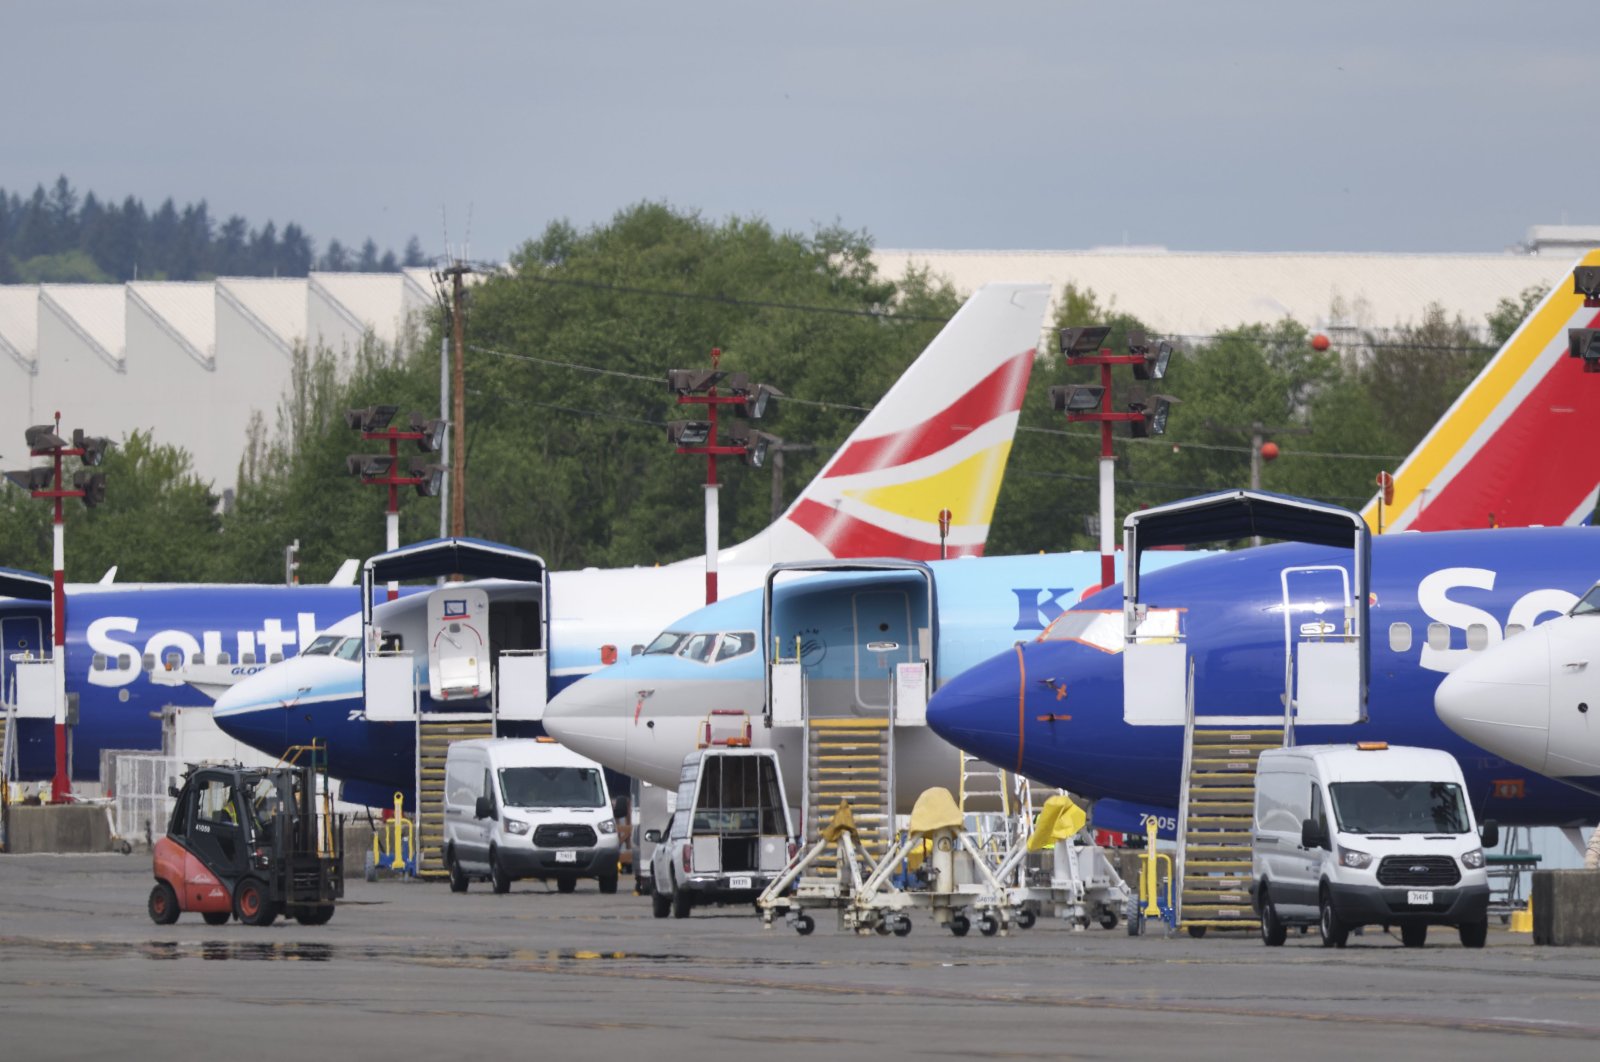 Grounded Boeing 737 MAX airplanes outside the company's factory, Renton, Washington, April 29, 2020. Boeing last week announced that it would lay off 15% of its commercial-airplanes division workforce amid the fallout from the coronavirus pandemic. (AFP Photo)